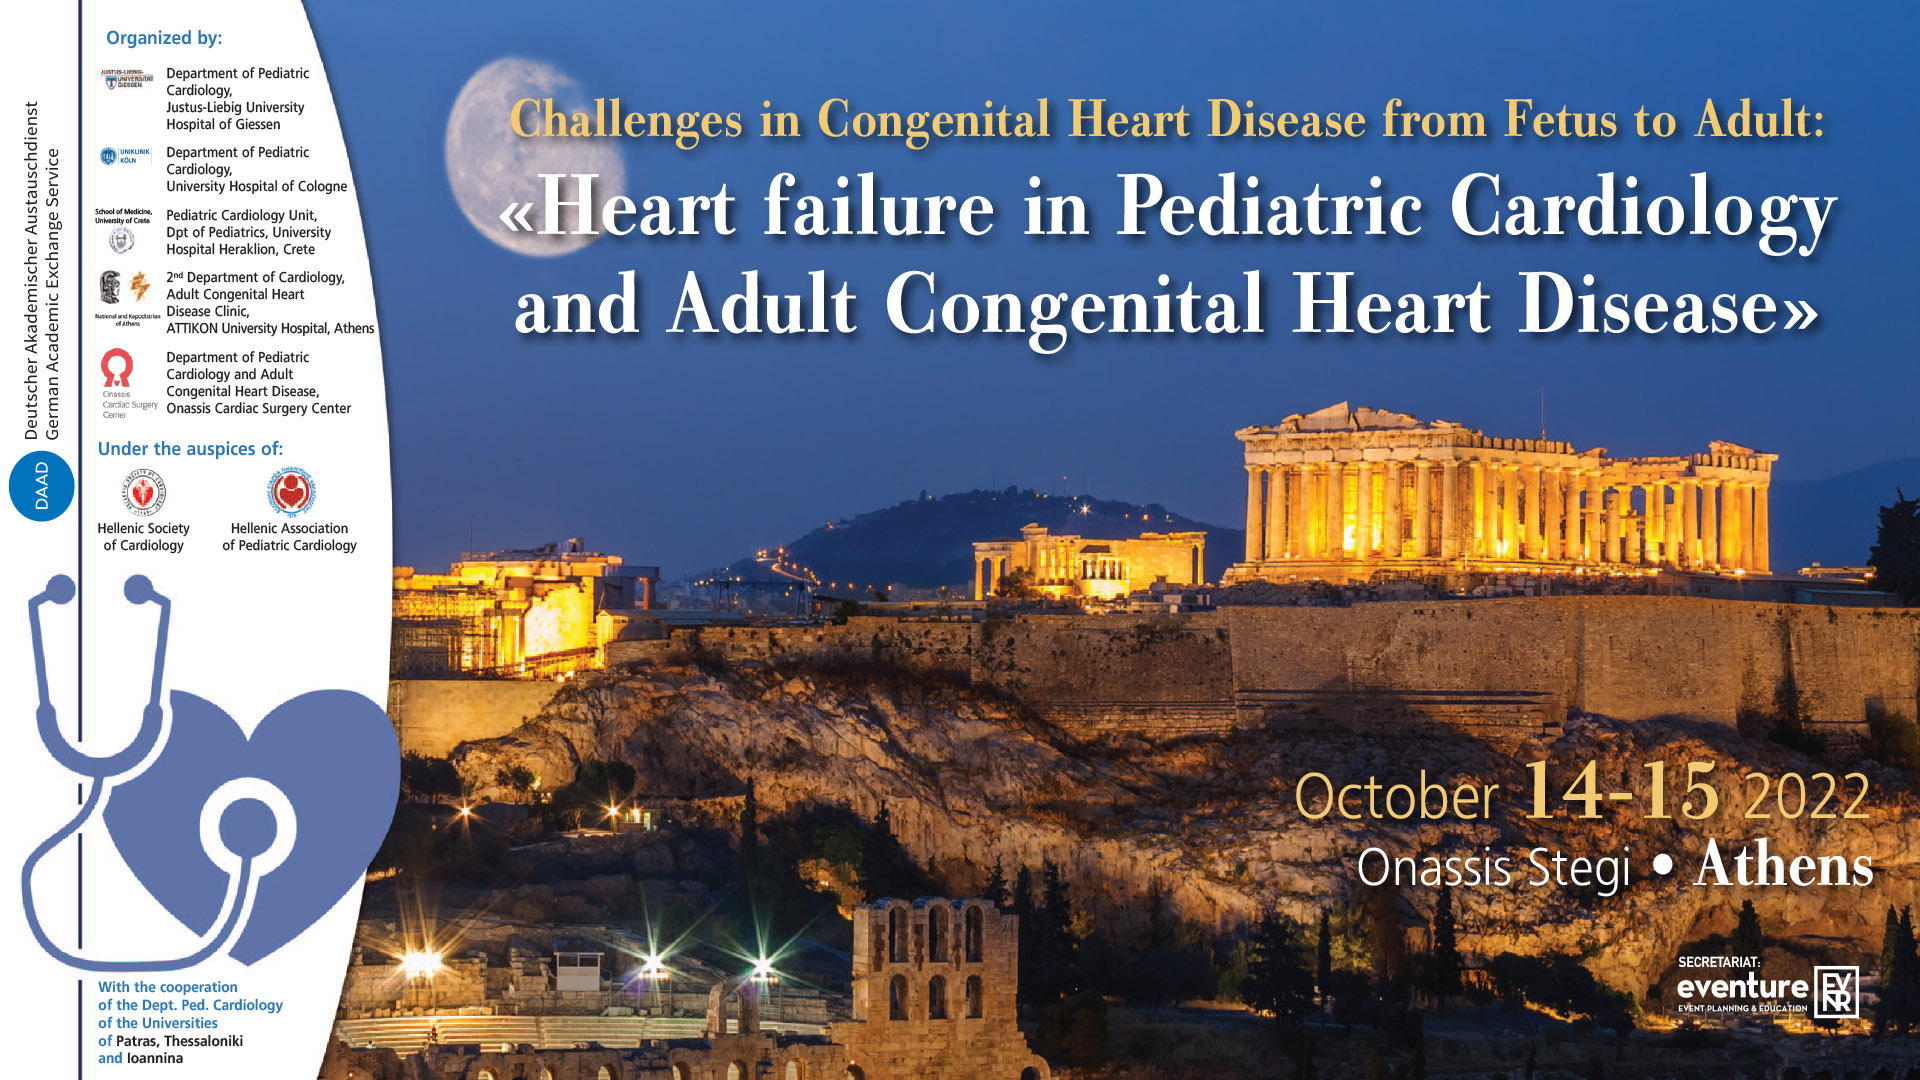 Challenges in Congenital Heart Disease from Fetus to Adult:  “Heart failure in Pediatric Cardiology and Adult Congenital Heart Disease” - ONASSIS STEGI